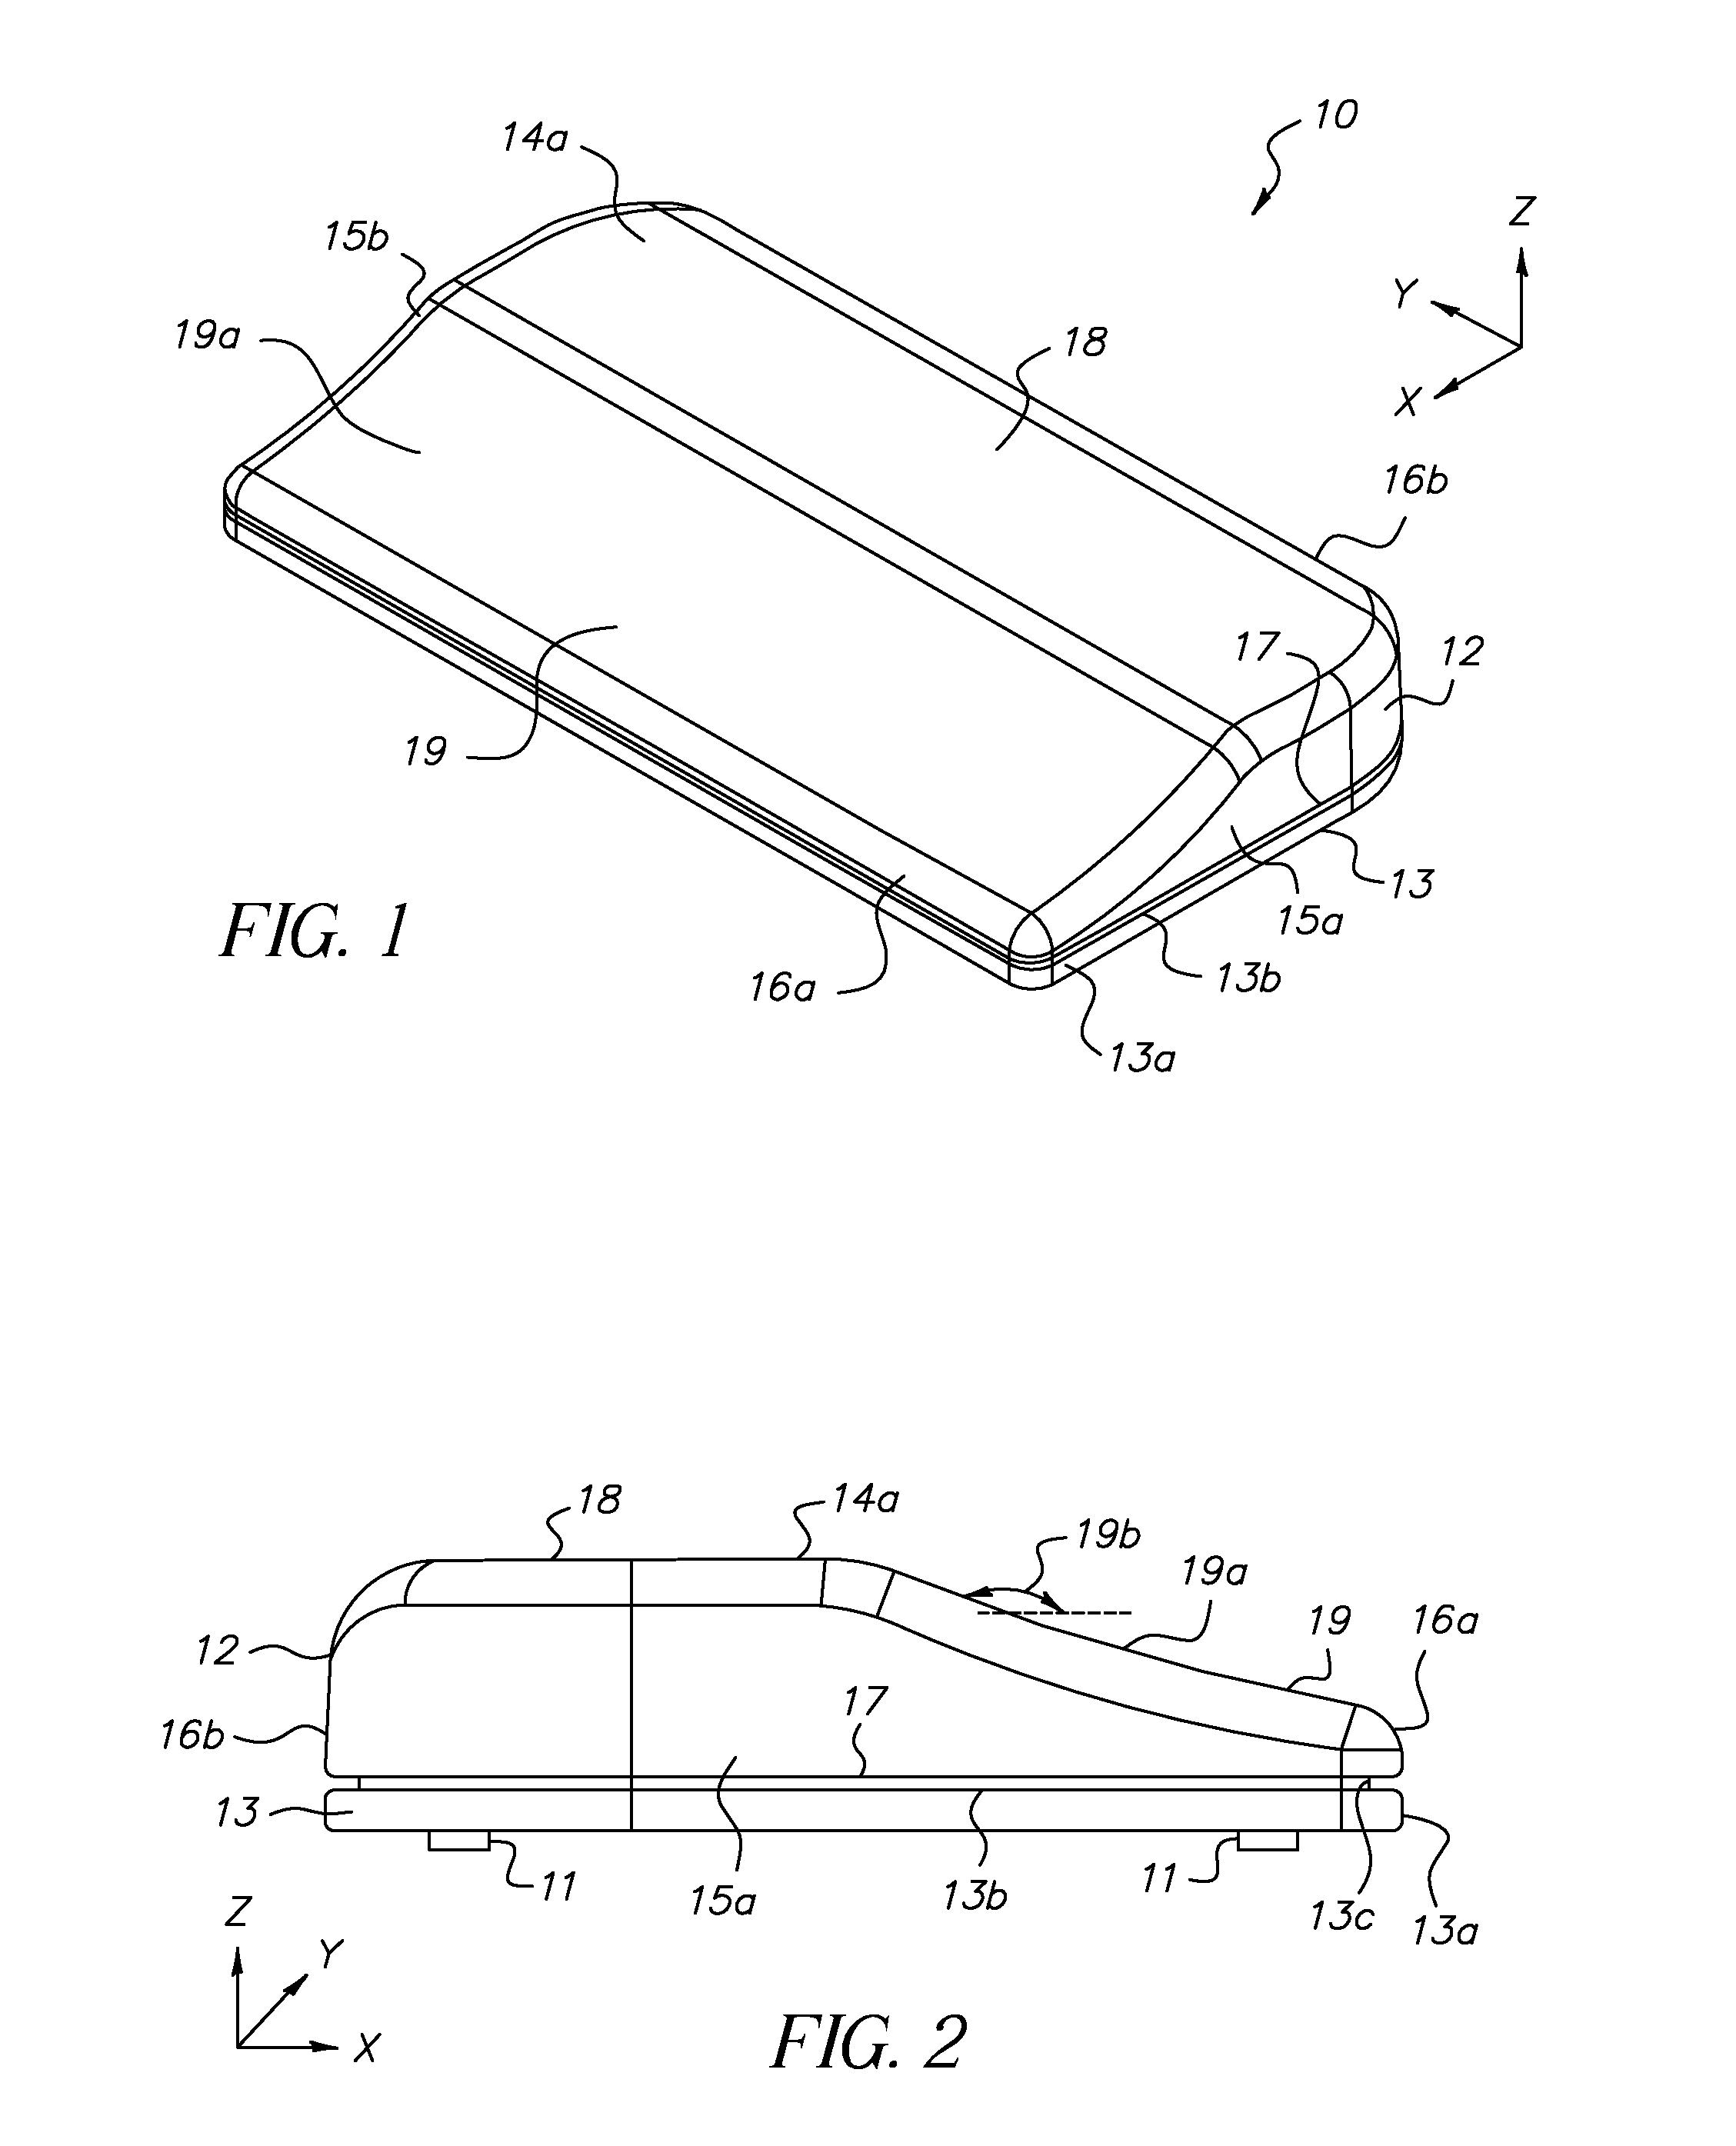 Device for applying stimulation to the foot or feet of a person